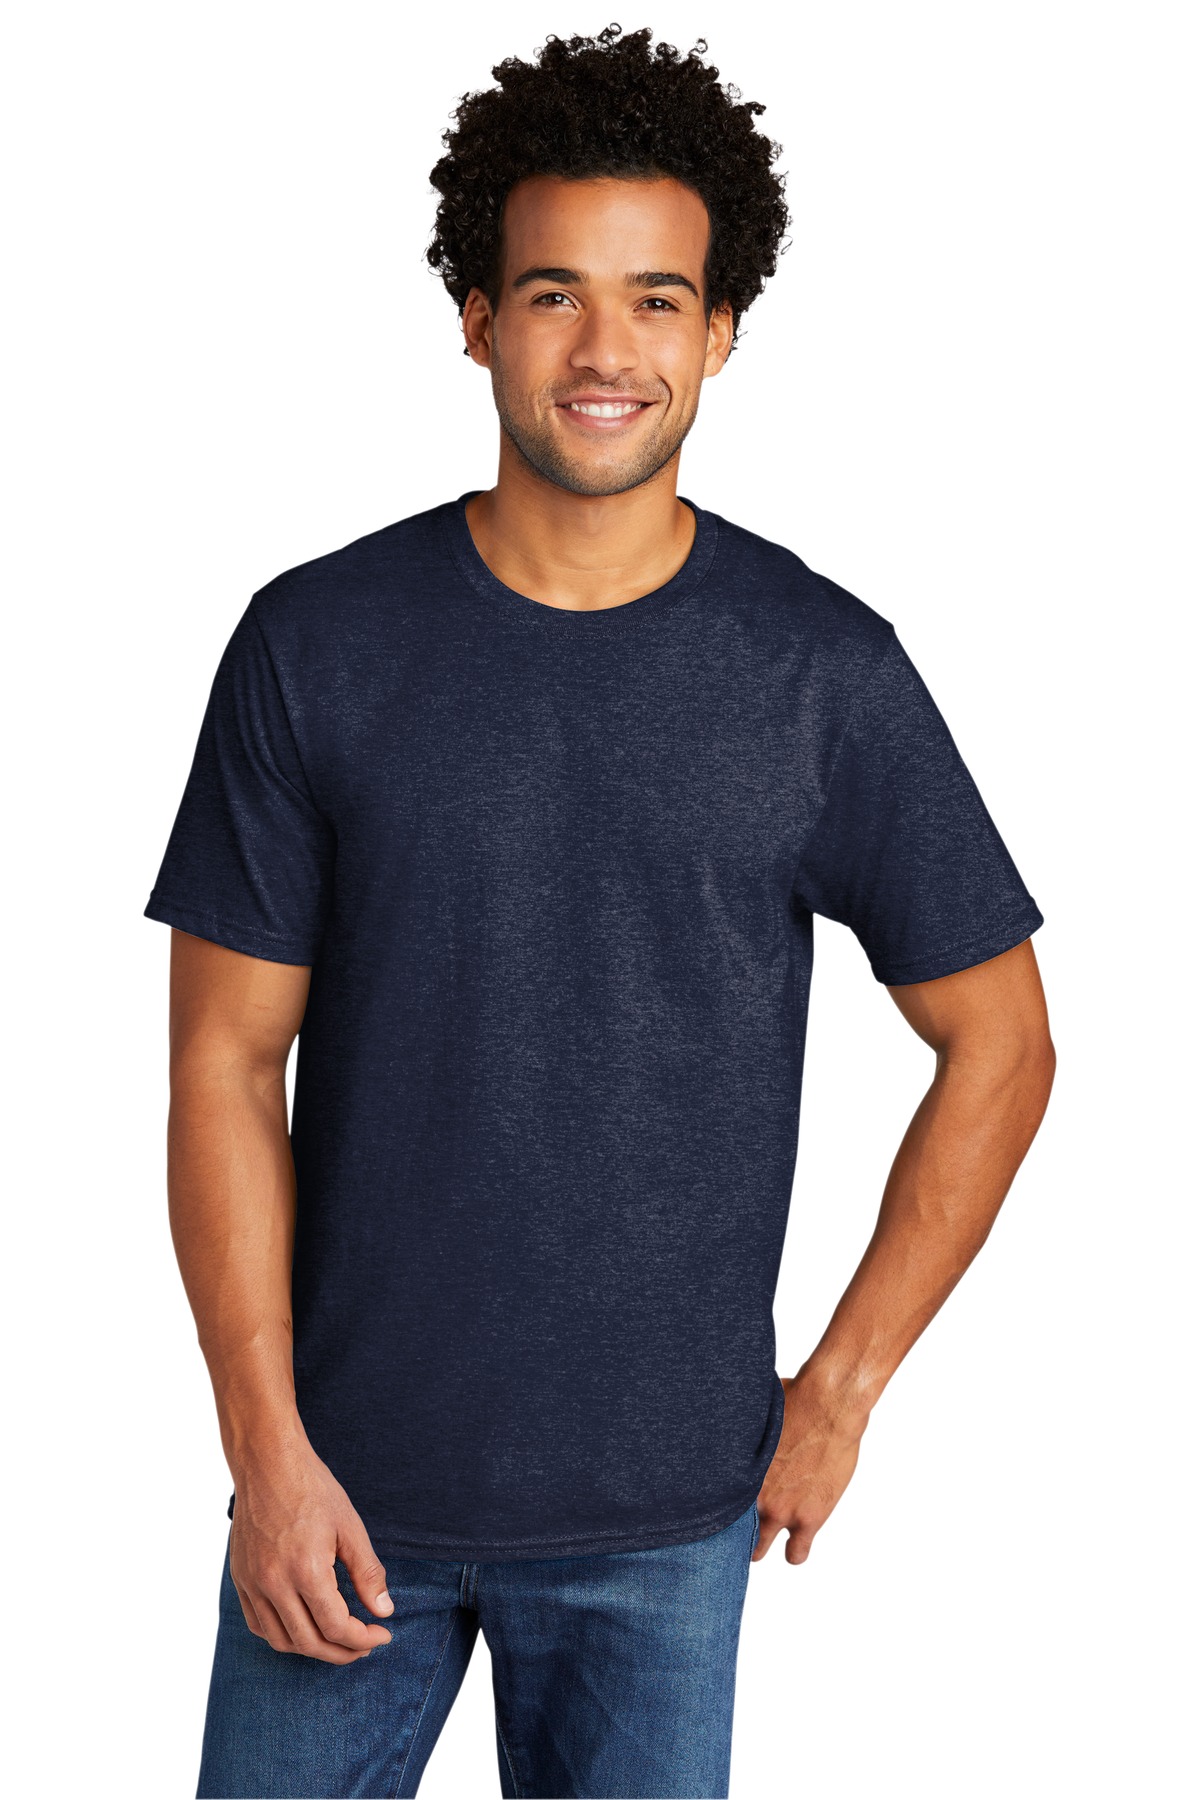 click to view Team Navy Heather